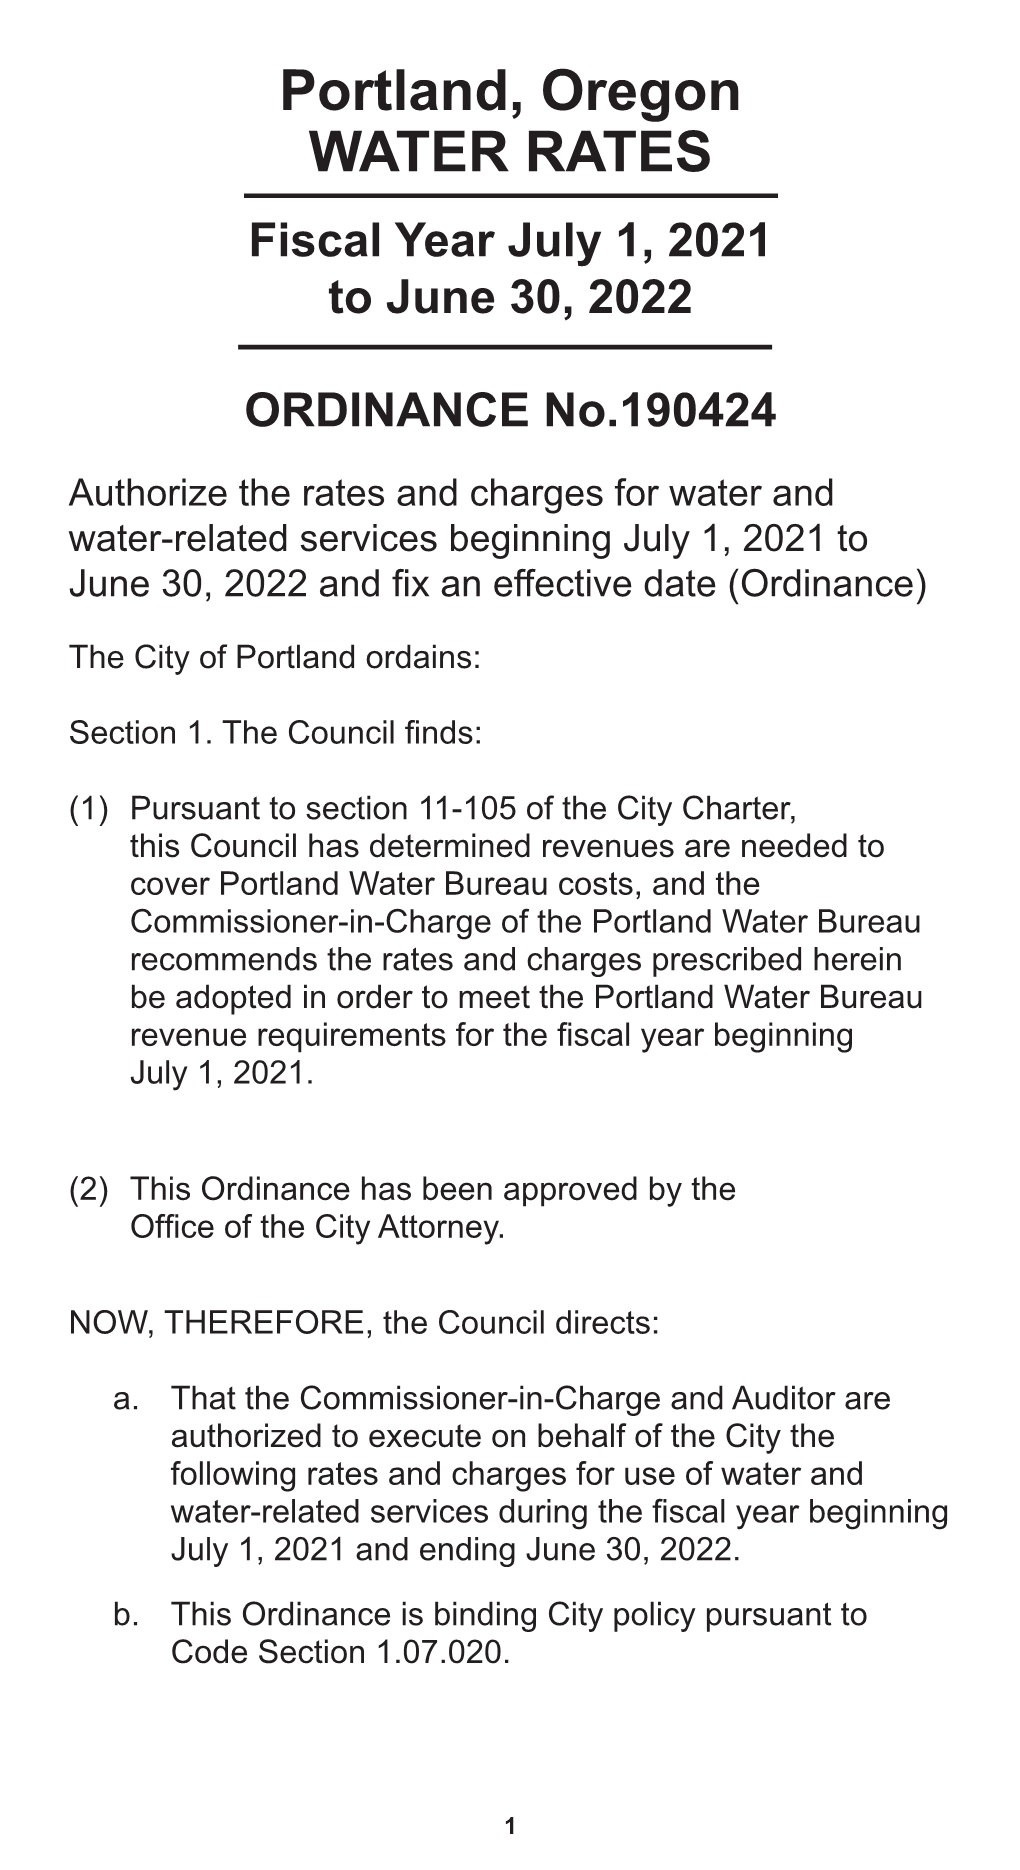 Portland, Oregon WATER RATES Fiscal Year July 1, 2021 to June 30, 2022